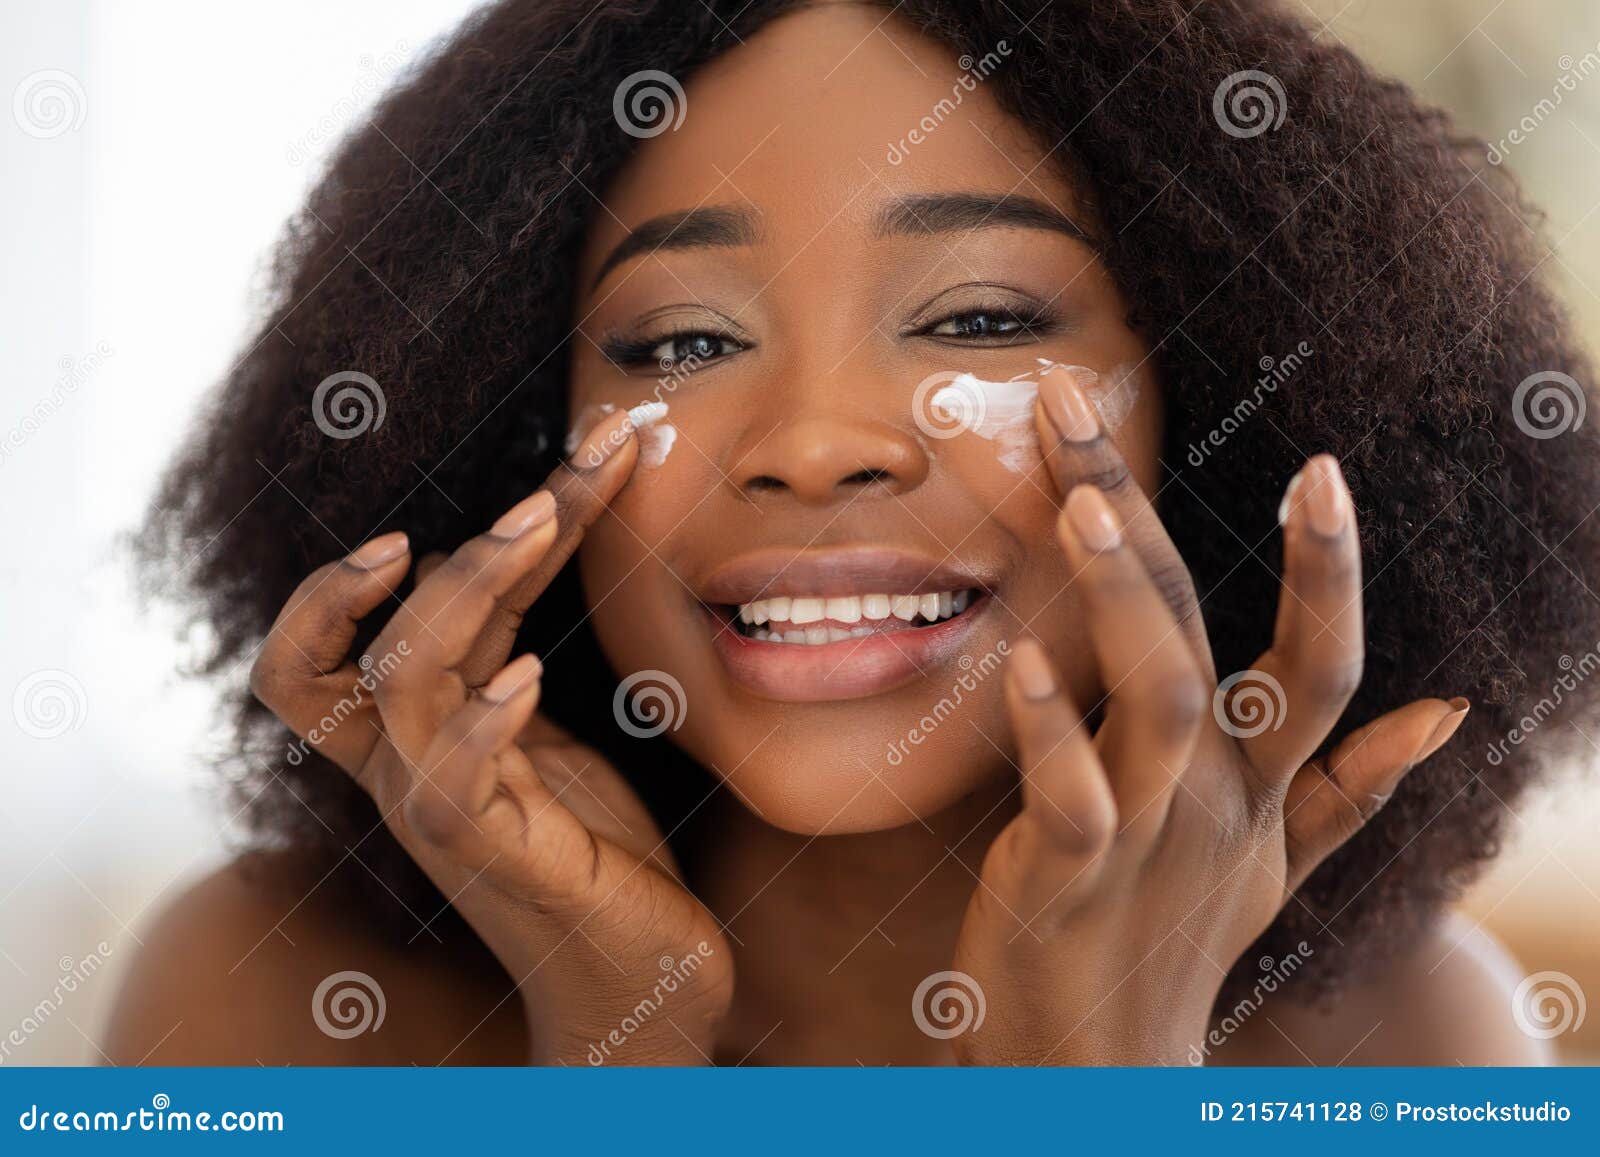 portrait of lovely black woman applying face cream onto her cheeks, smiling at camera, indoors